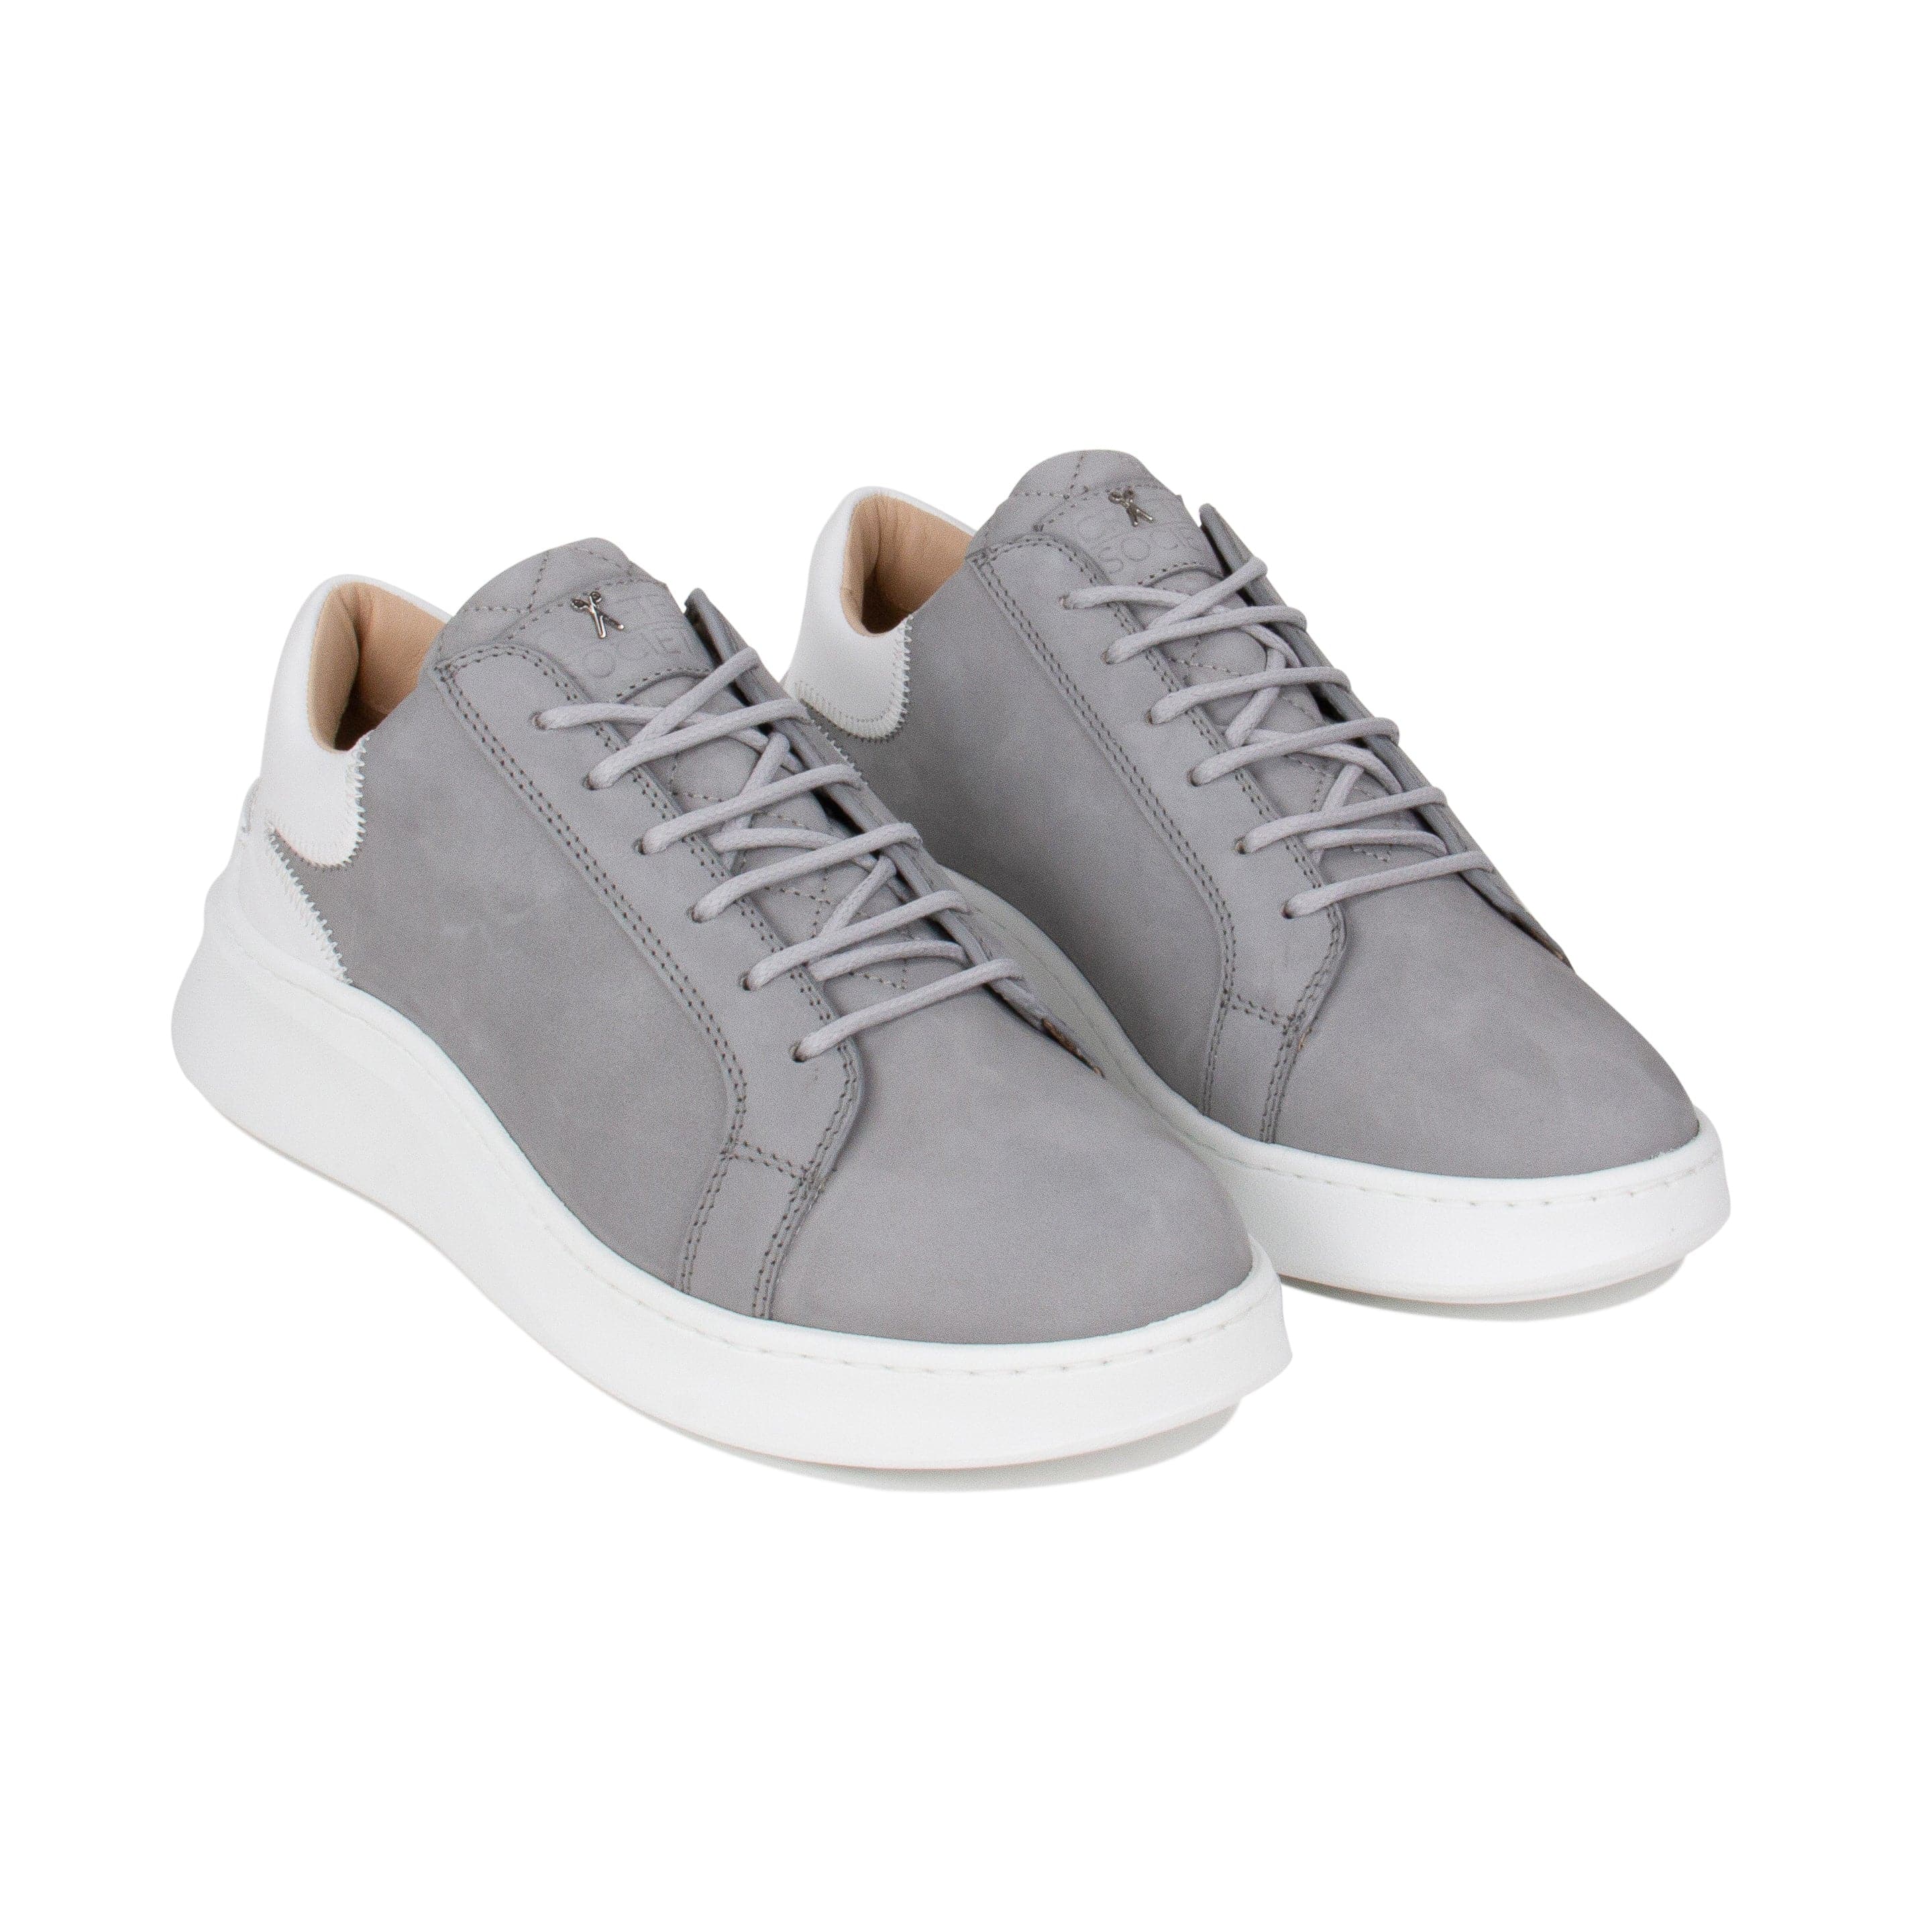 Matteo Low chunky Sneaker | Grey Nubuck Leather | White Outsole | Made in Italy